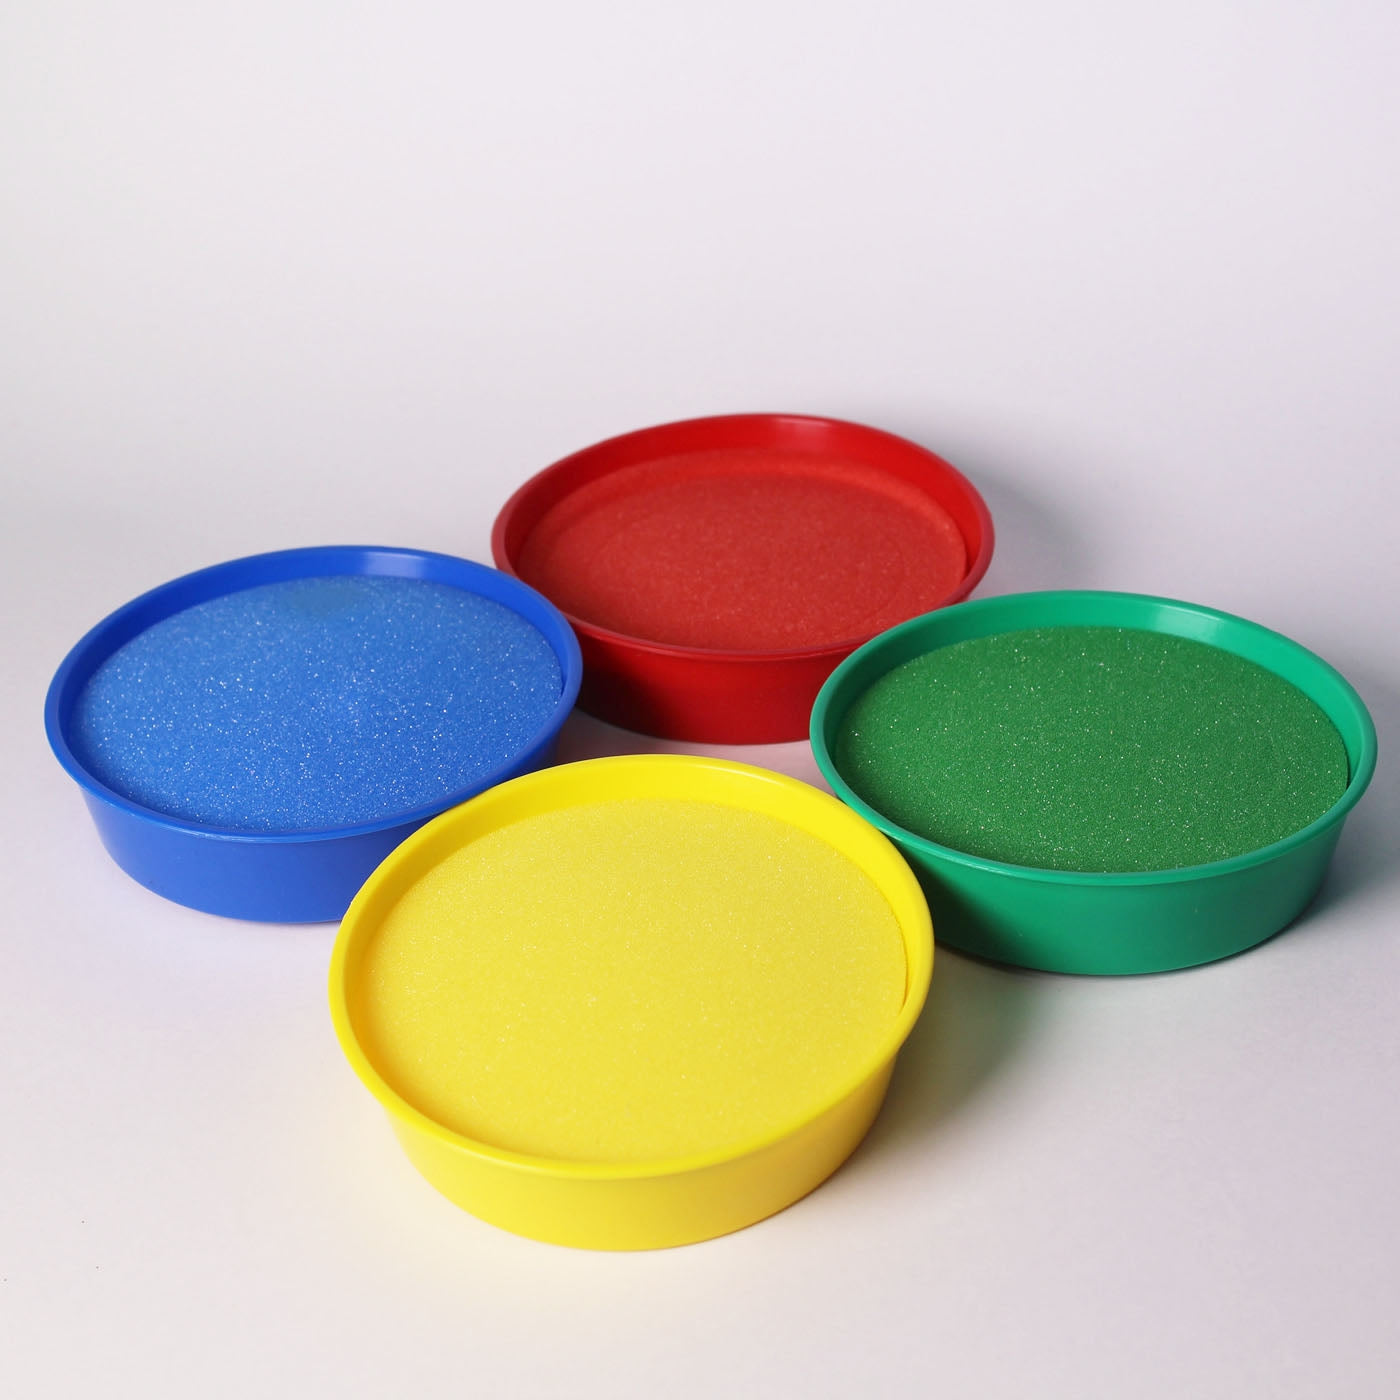 bowls with removable sponges